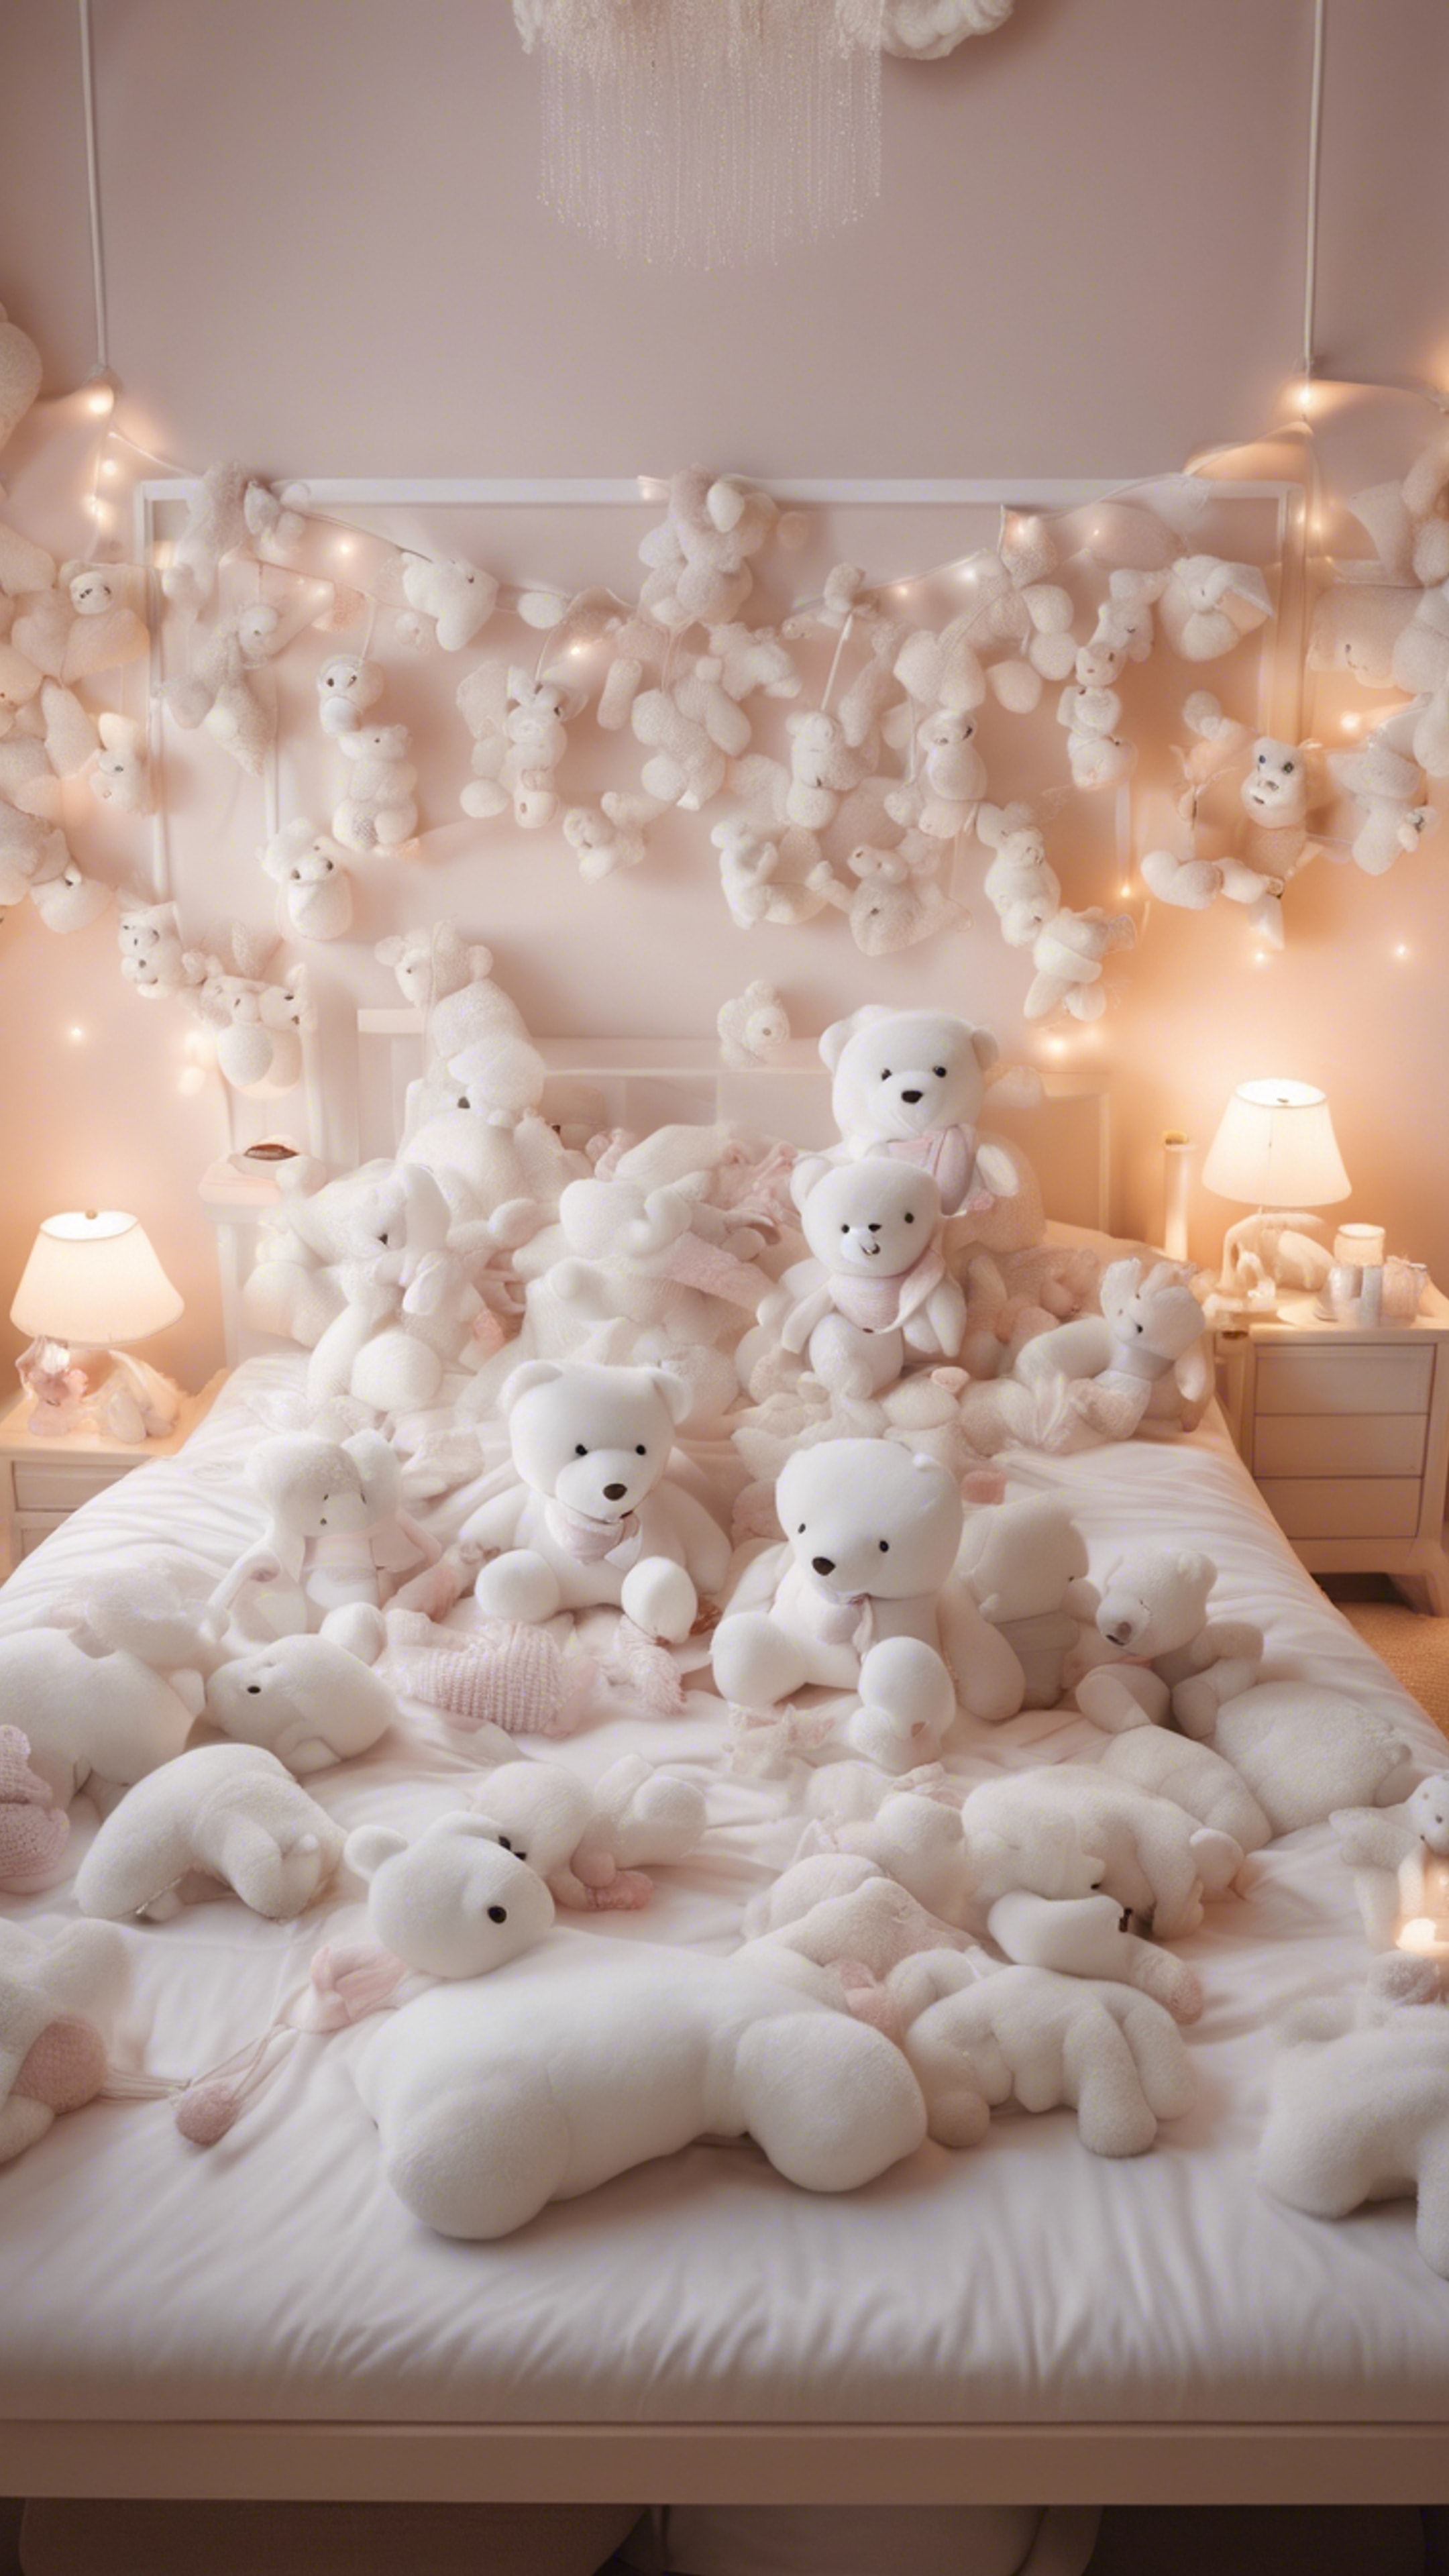 A kawaii style decorated bedroom, filled with white teddies and cushions. Wallpaper[9112291410ac42cead00]